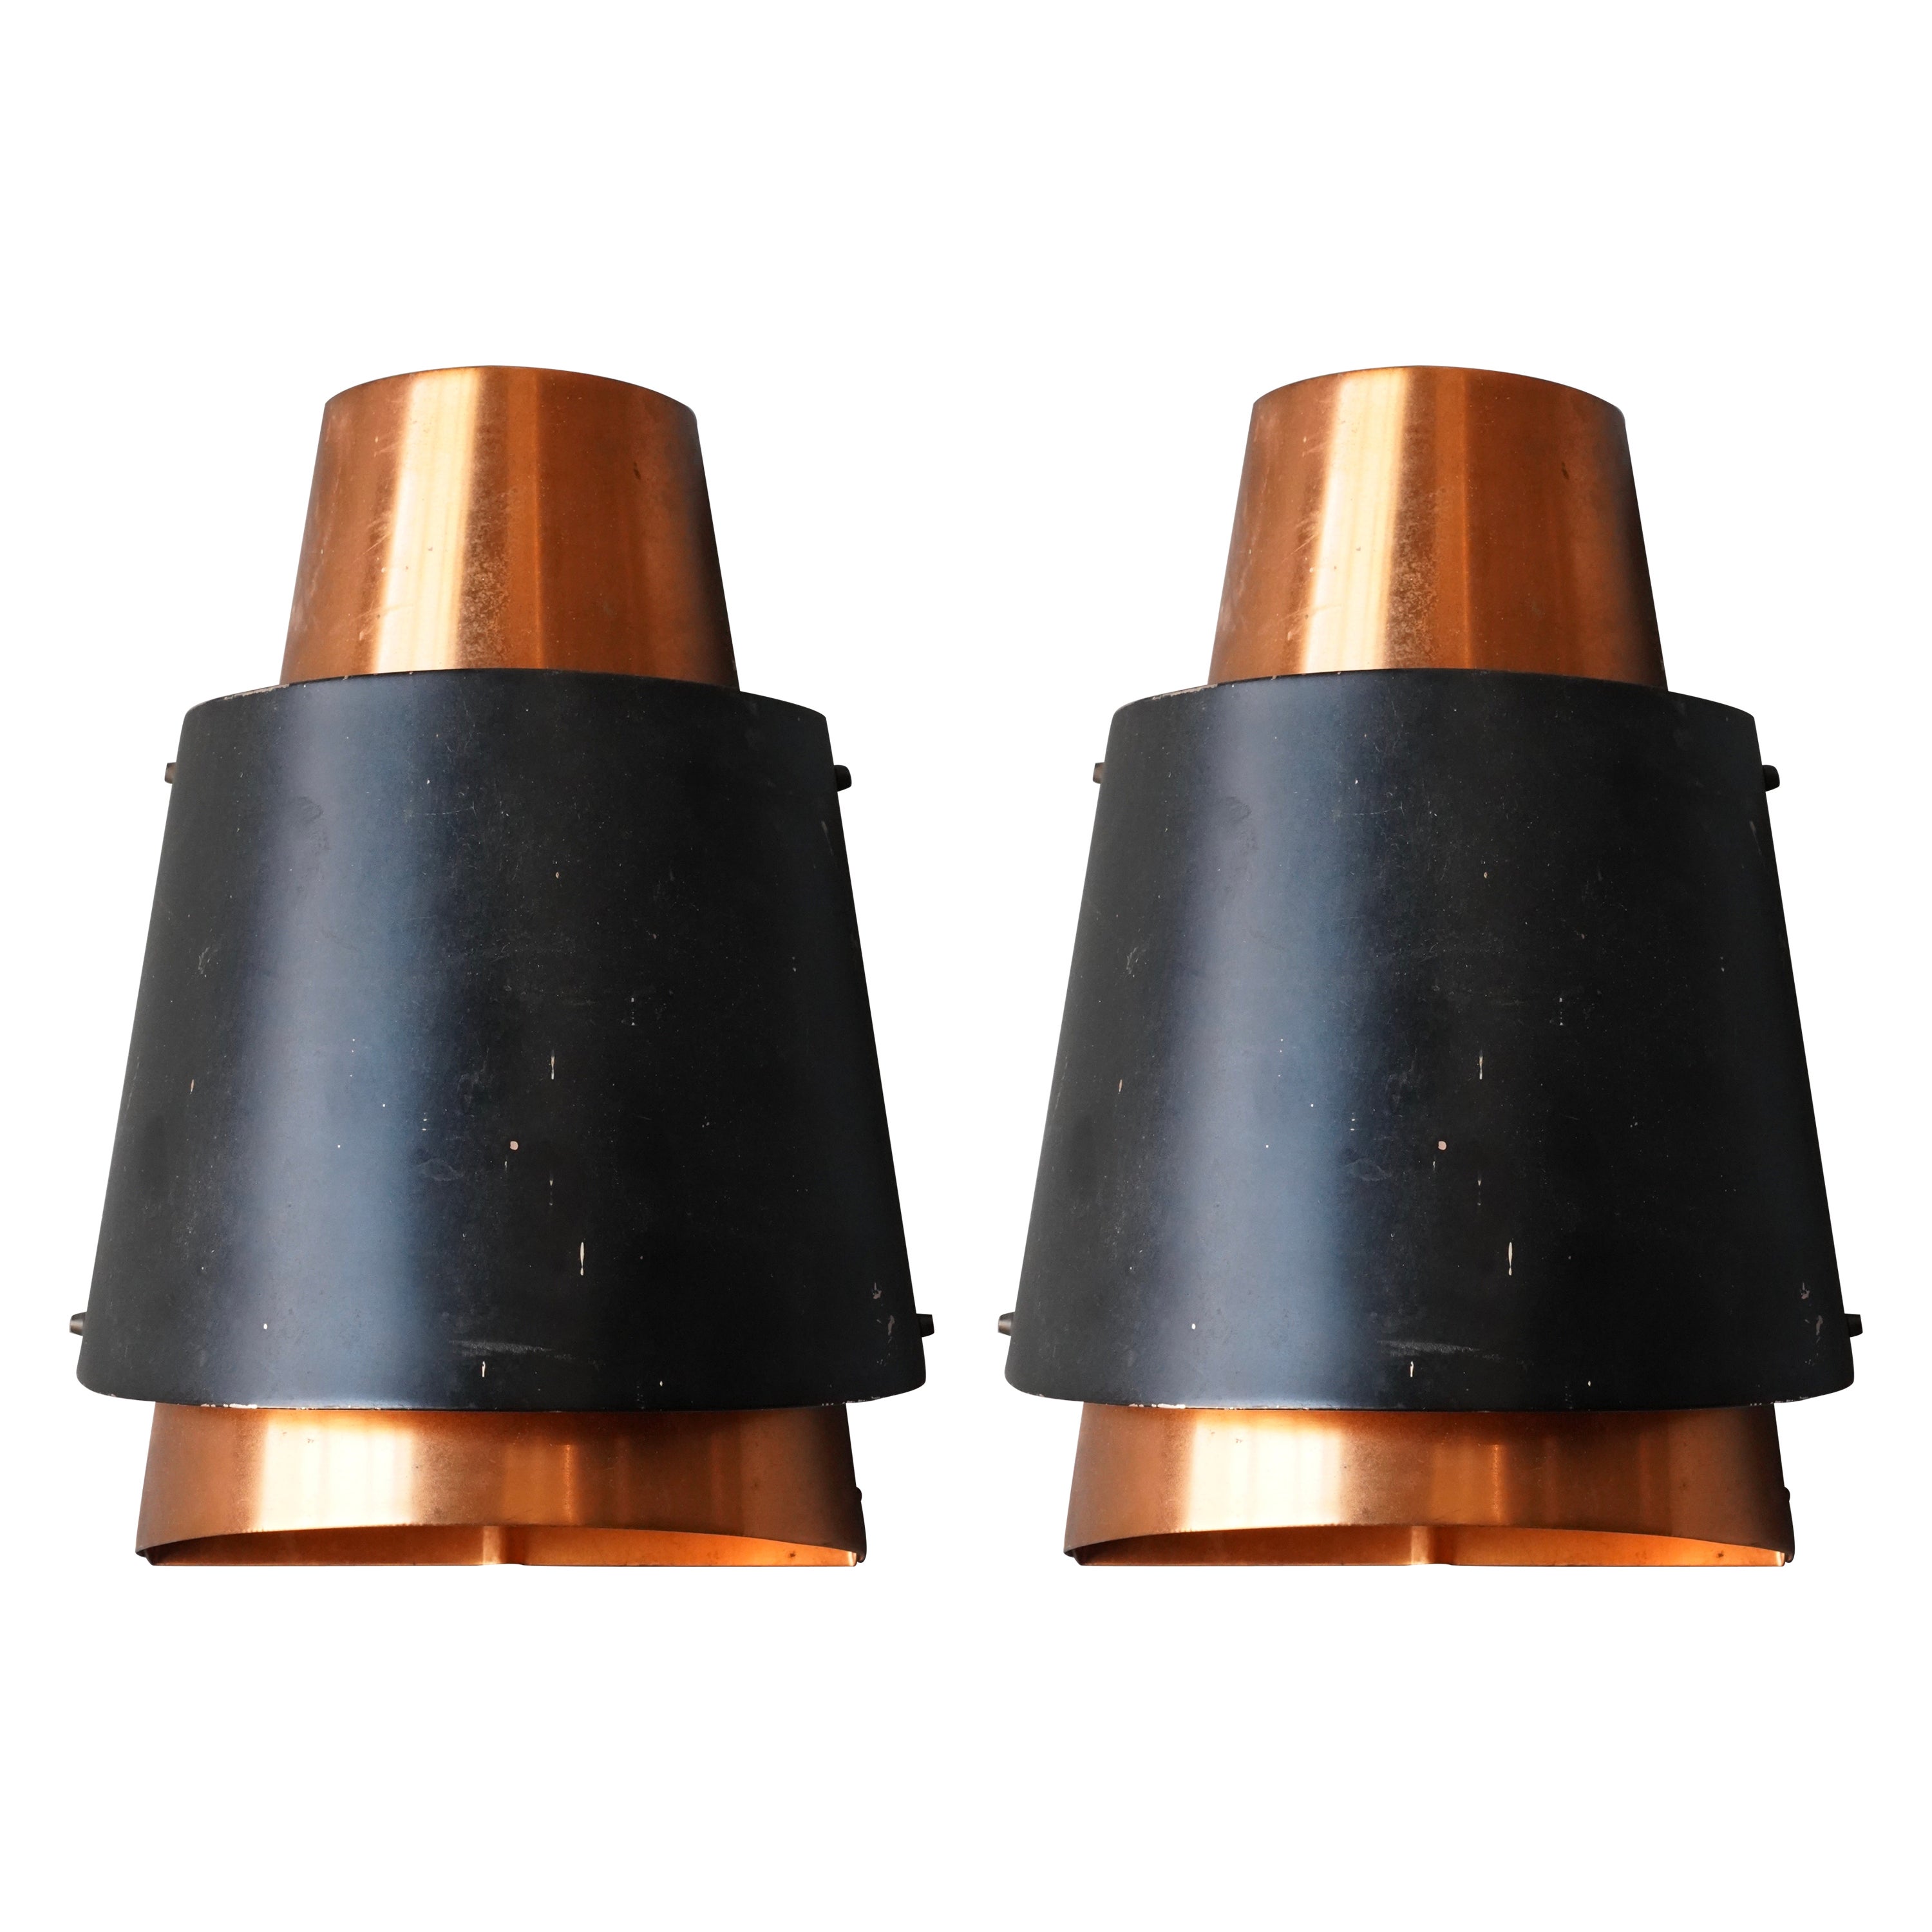 Bent Karlby “Østerport" Wall Lights, Copper, Lacquered Metal, Lyfa Denmark 1960s